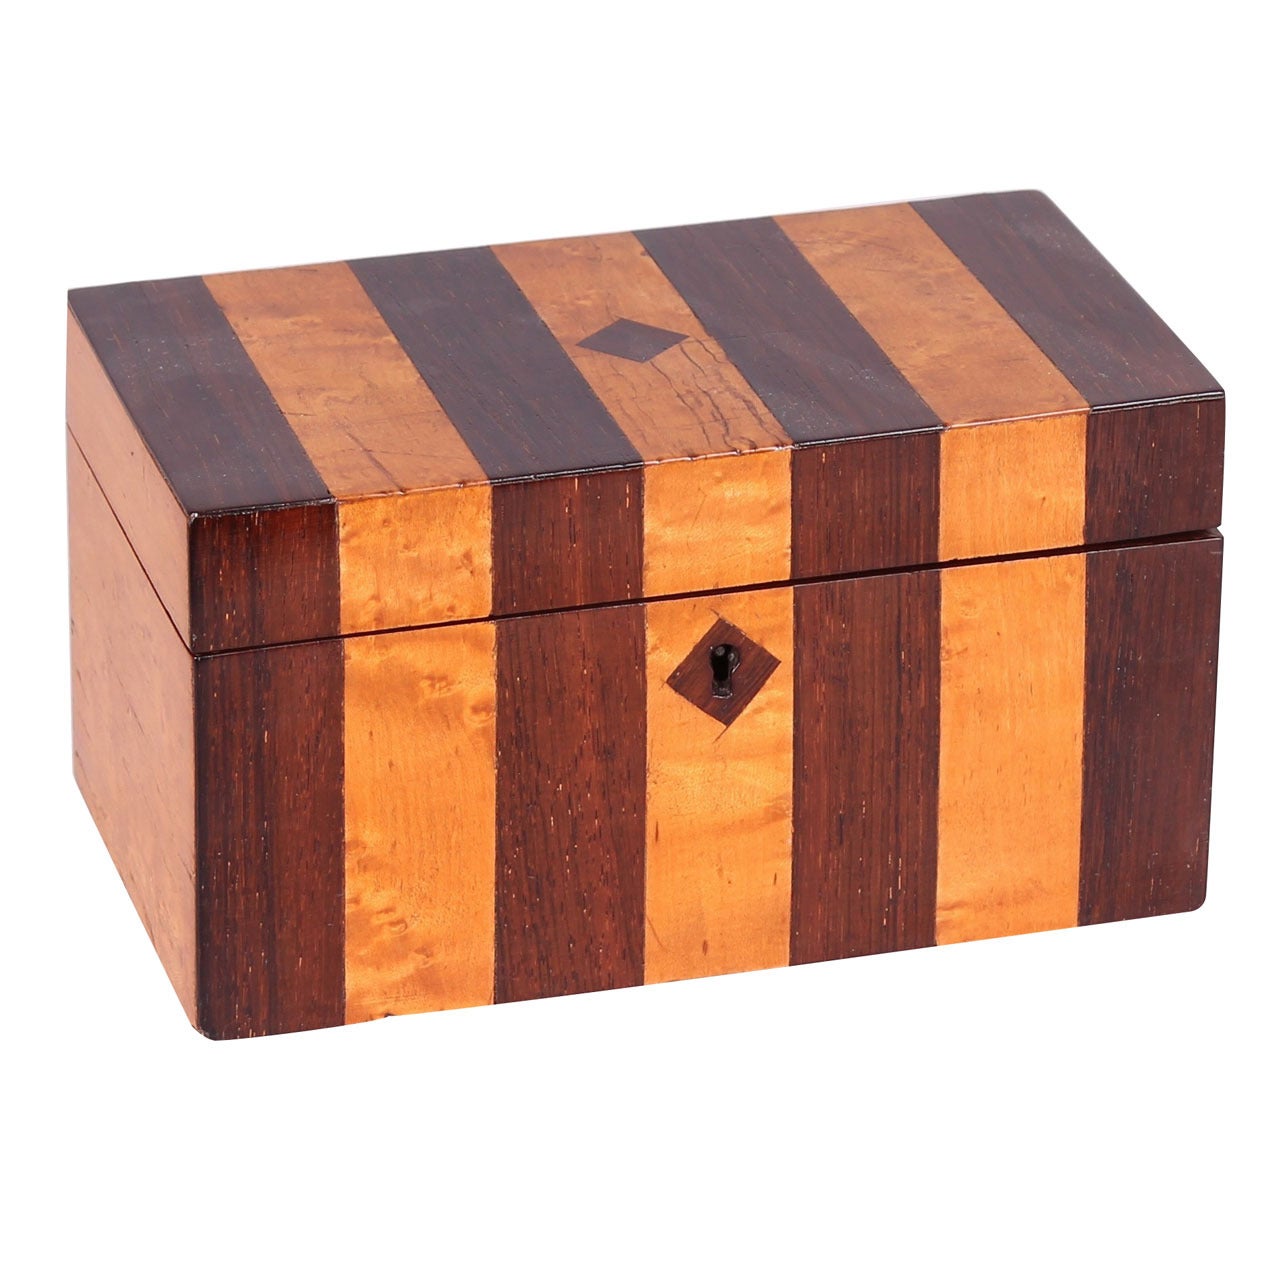 Early Victorian Bird's-Eye Maple and Rosewood Striped Double Tea-Caddy